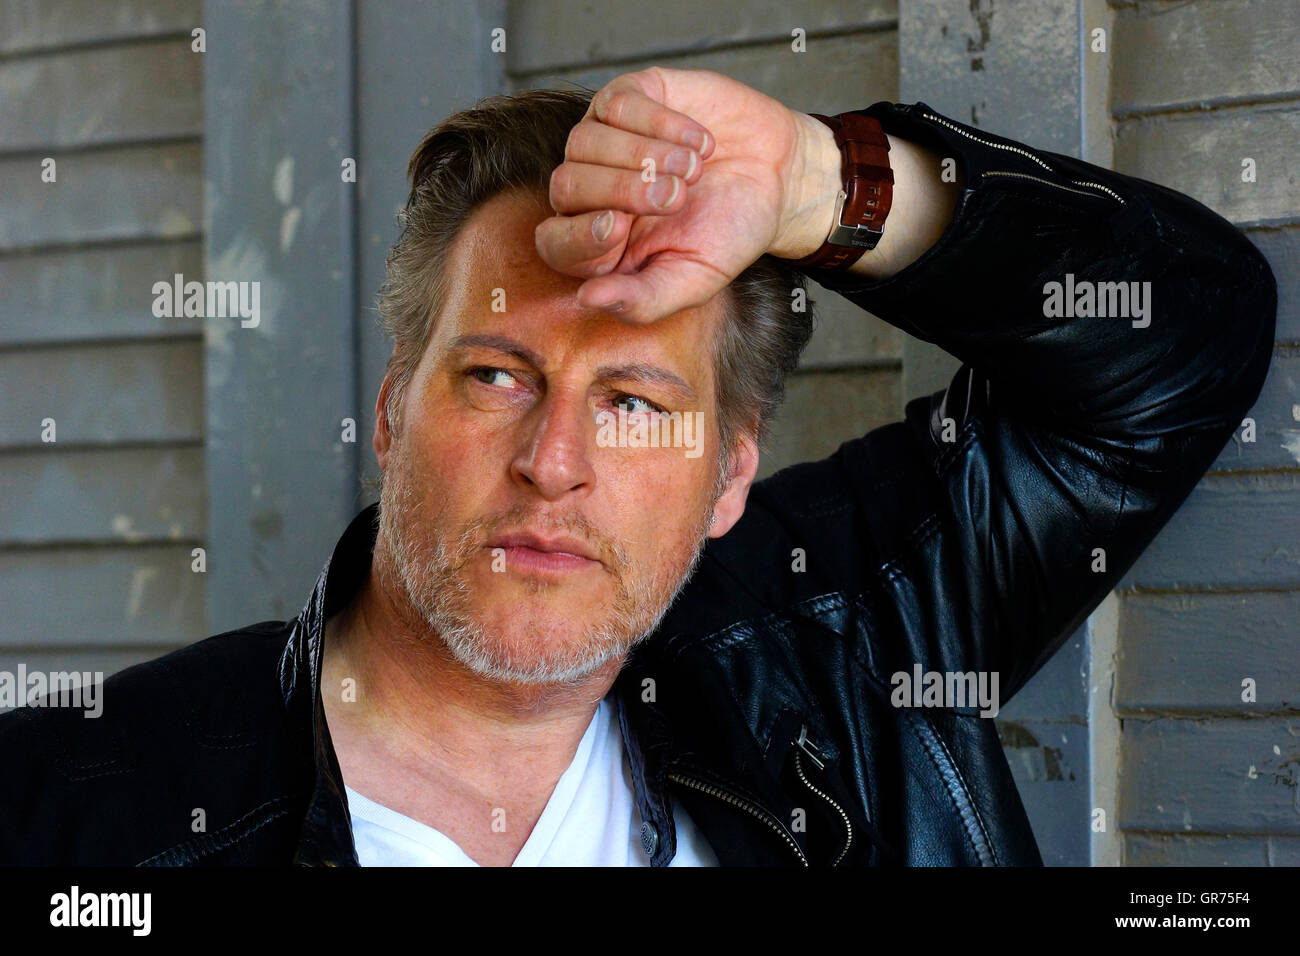 Man With Leather Jacket Stock Photo